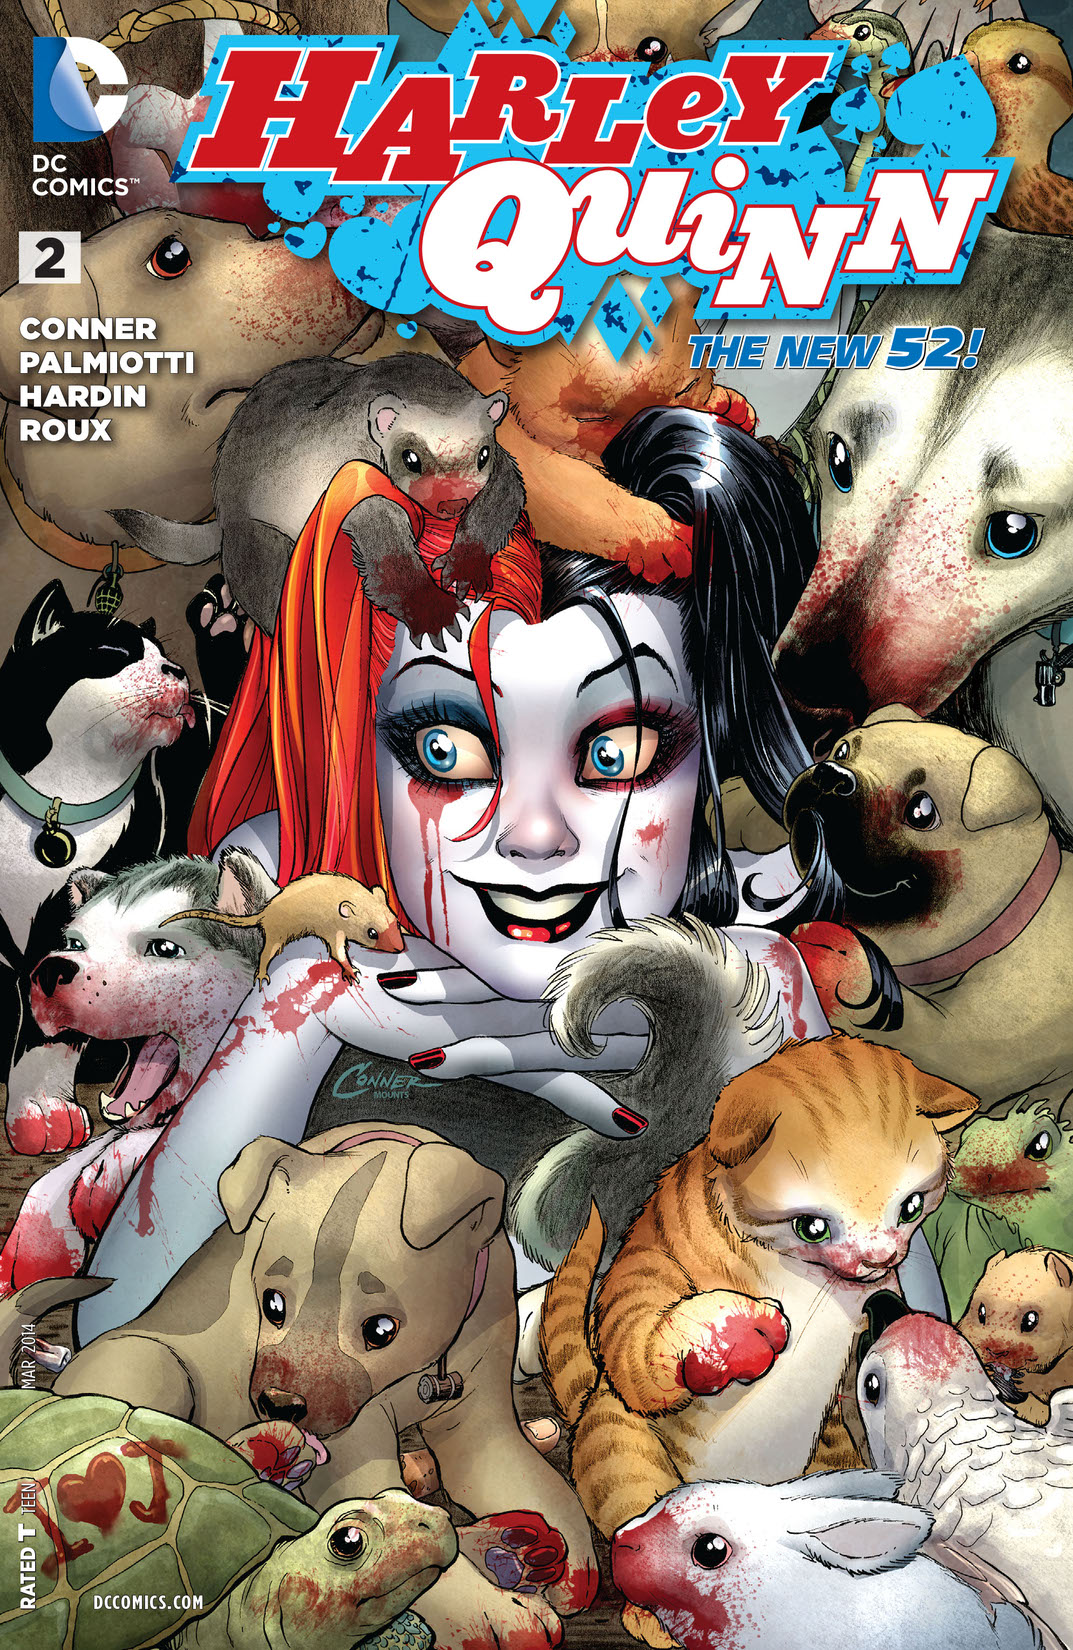 Harley Quinn (2013-) #2 preview images